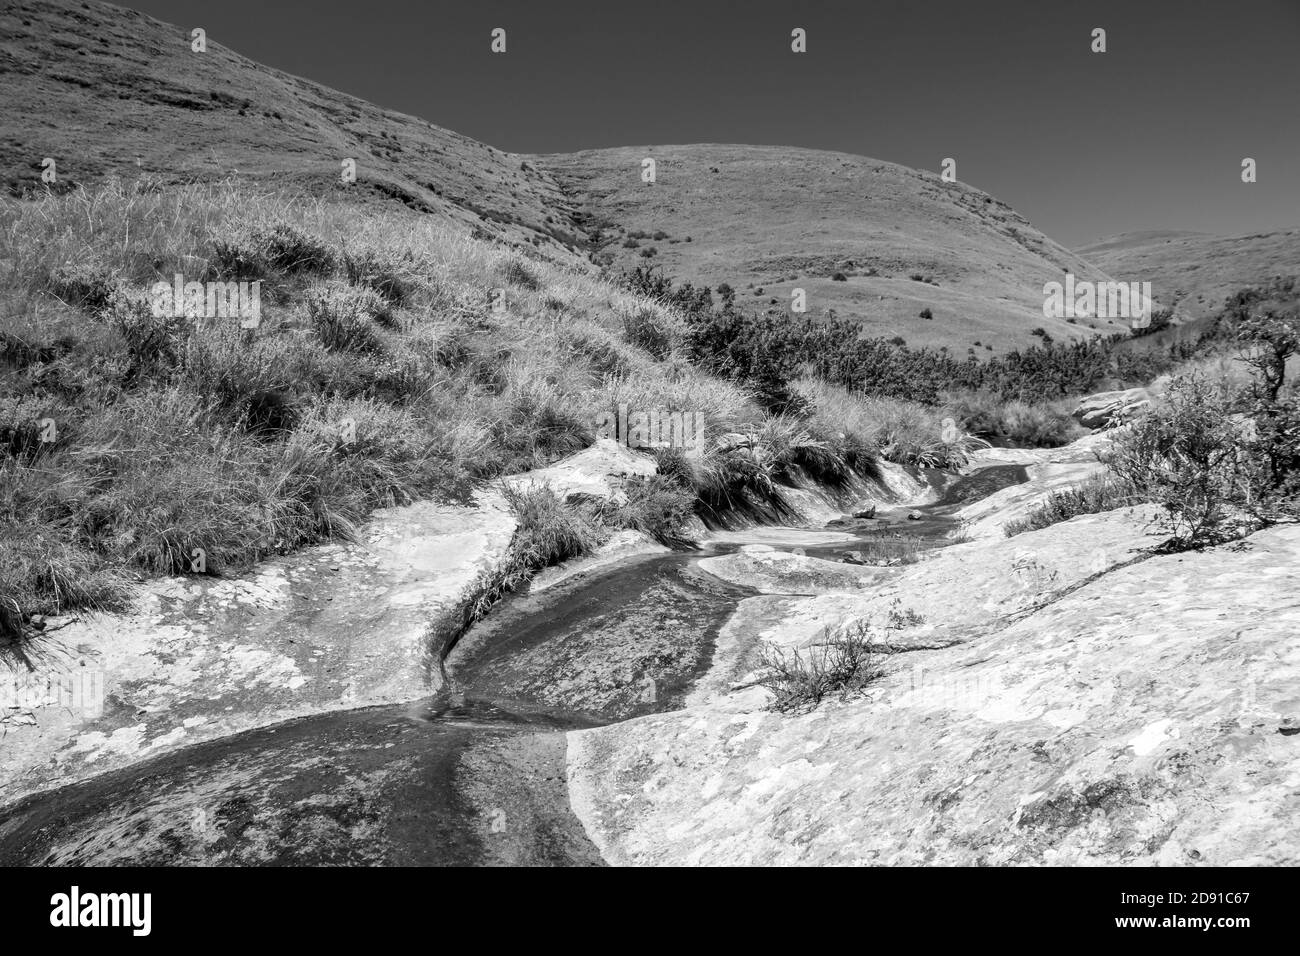 A small mountain stream flowing over a smooth weathered sandstone, through the high altitude grasslands of the Golden Gate National park, South Africa Stock Photo